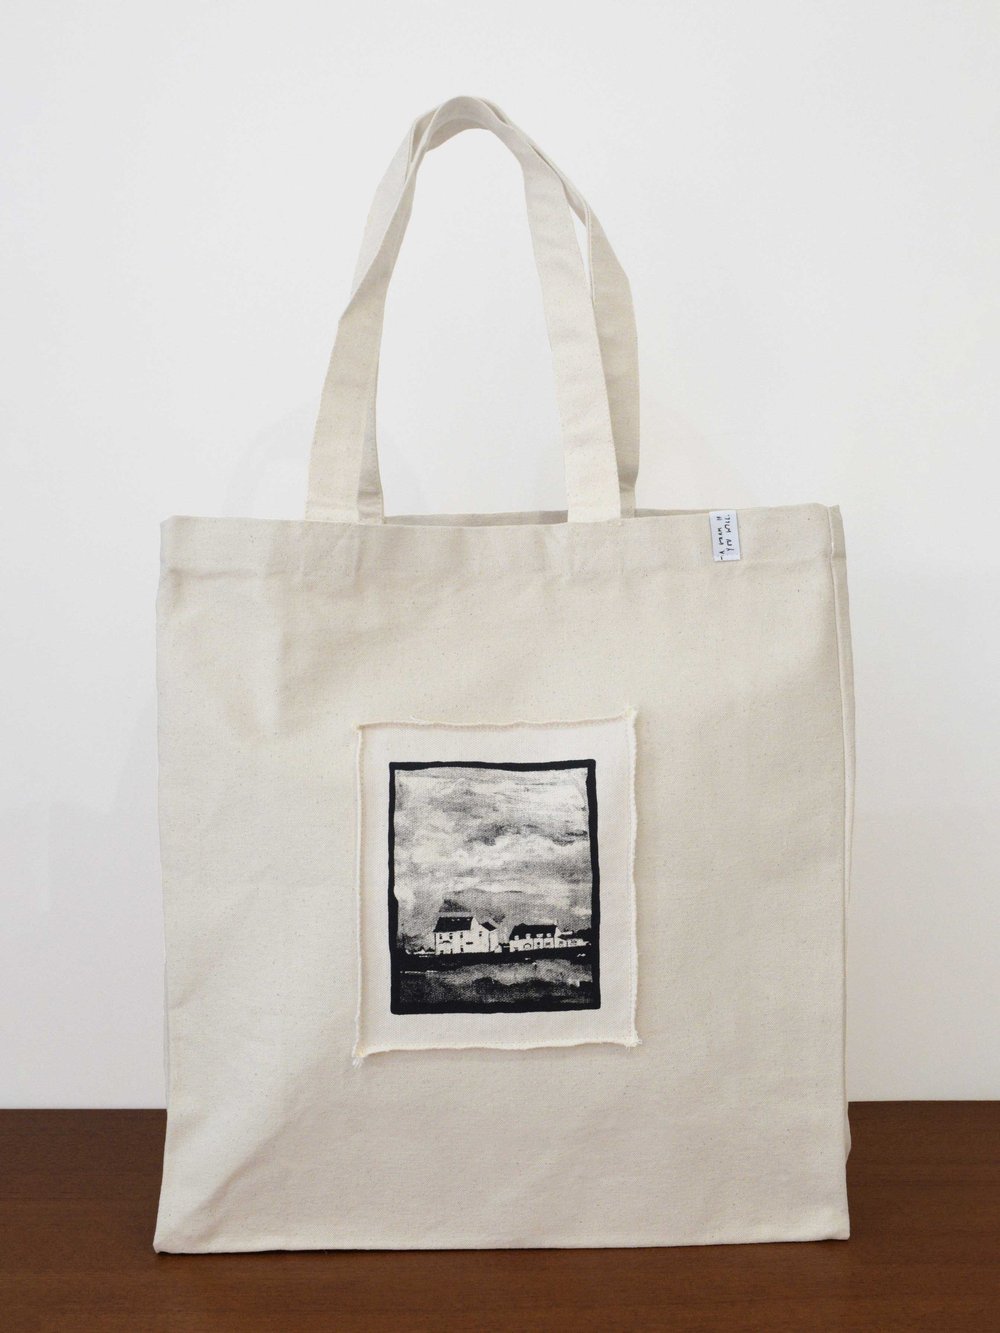 Tote bag by artist, Isobel Hill. Cream tote bag features central silkscreen printed patch of little houses painting in black ink